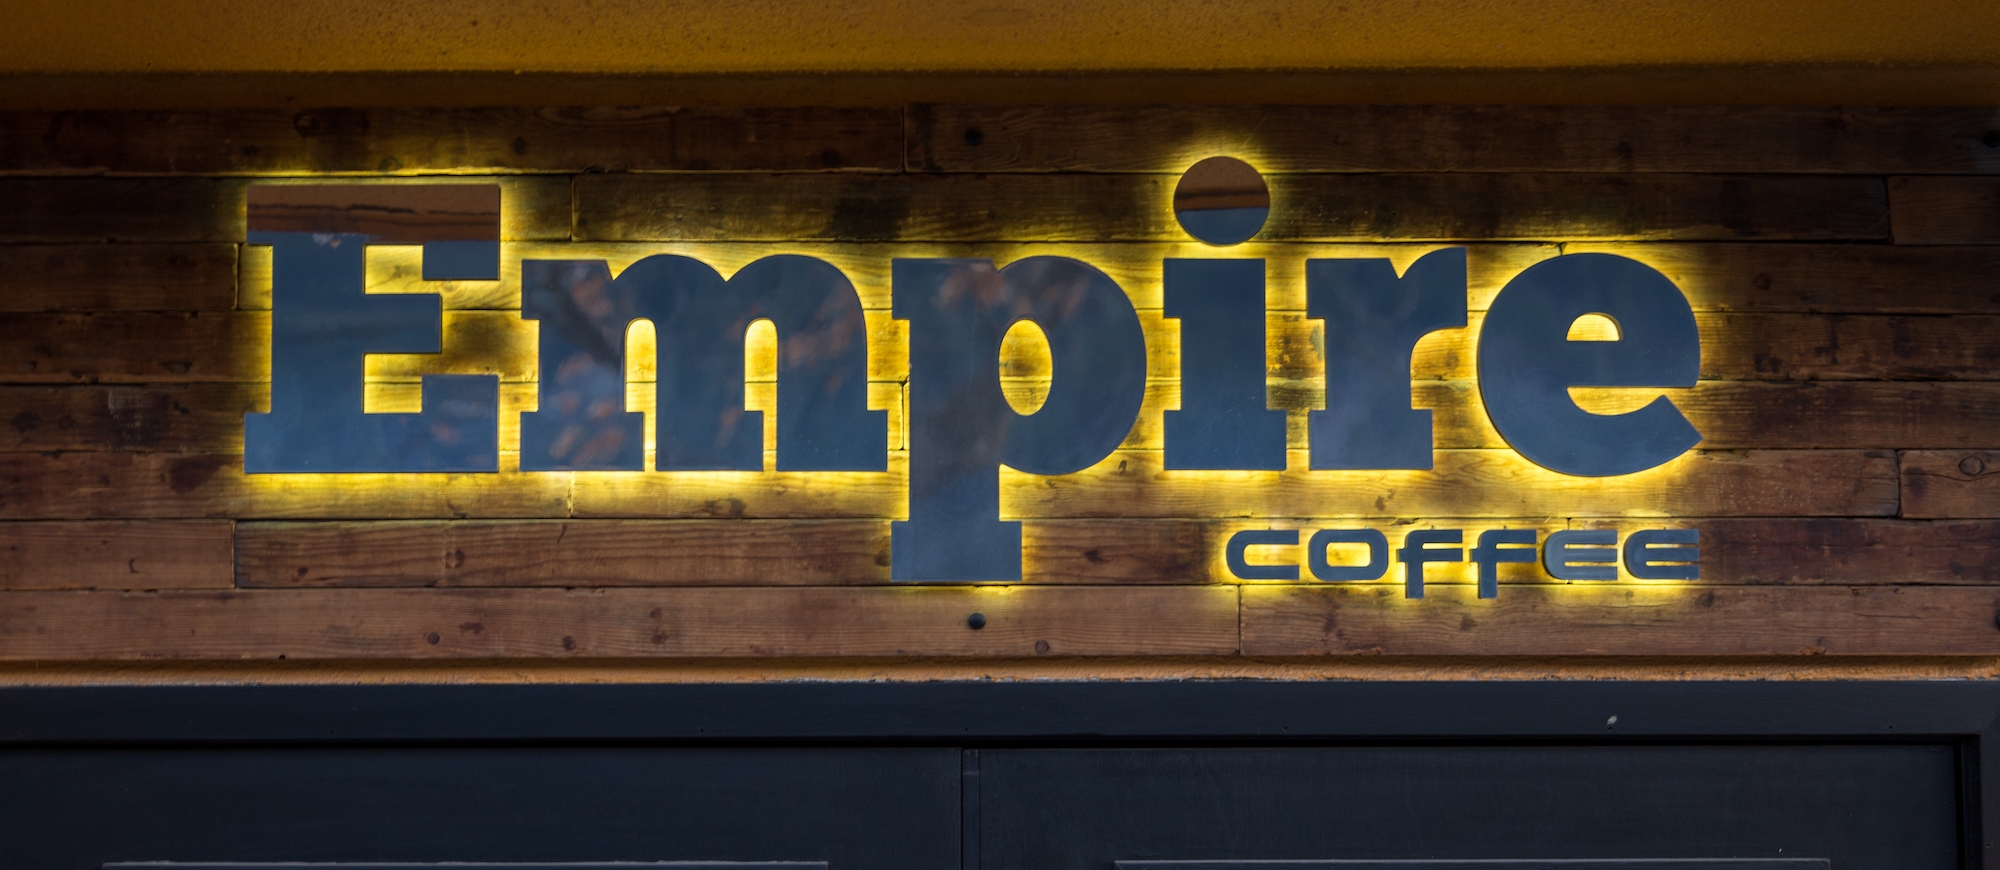 The Empire Coffee sign lit up on the outside of the building